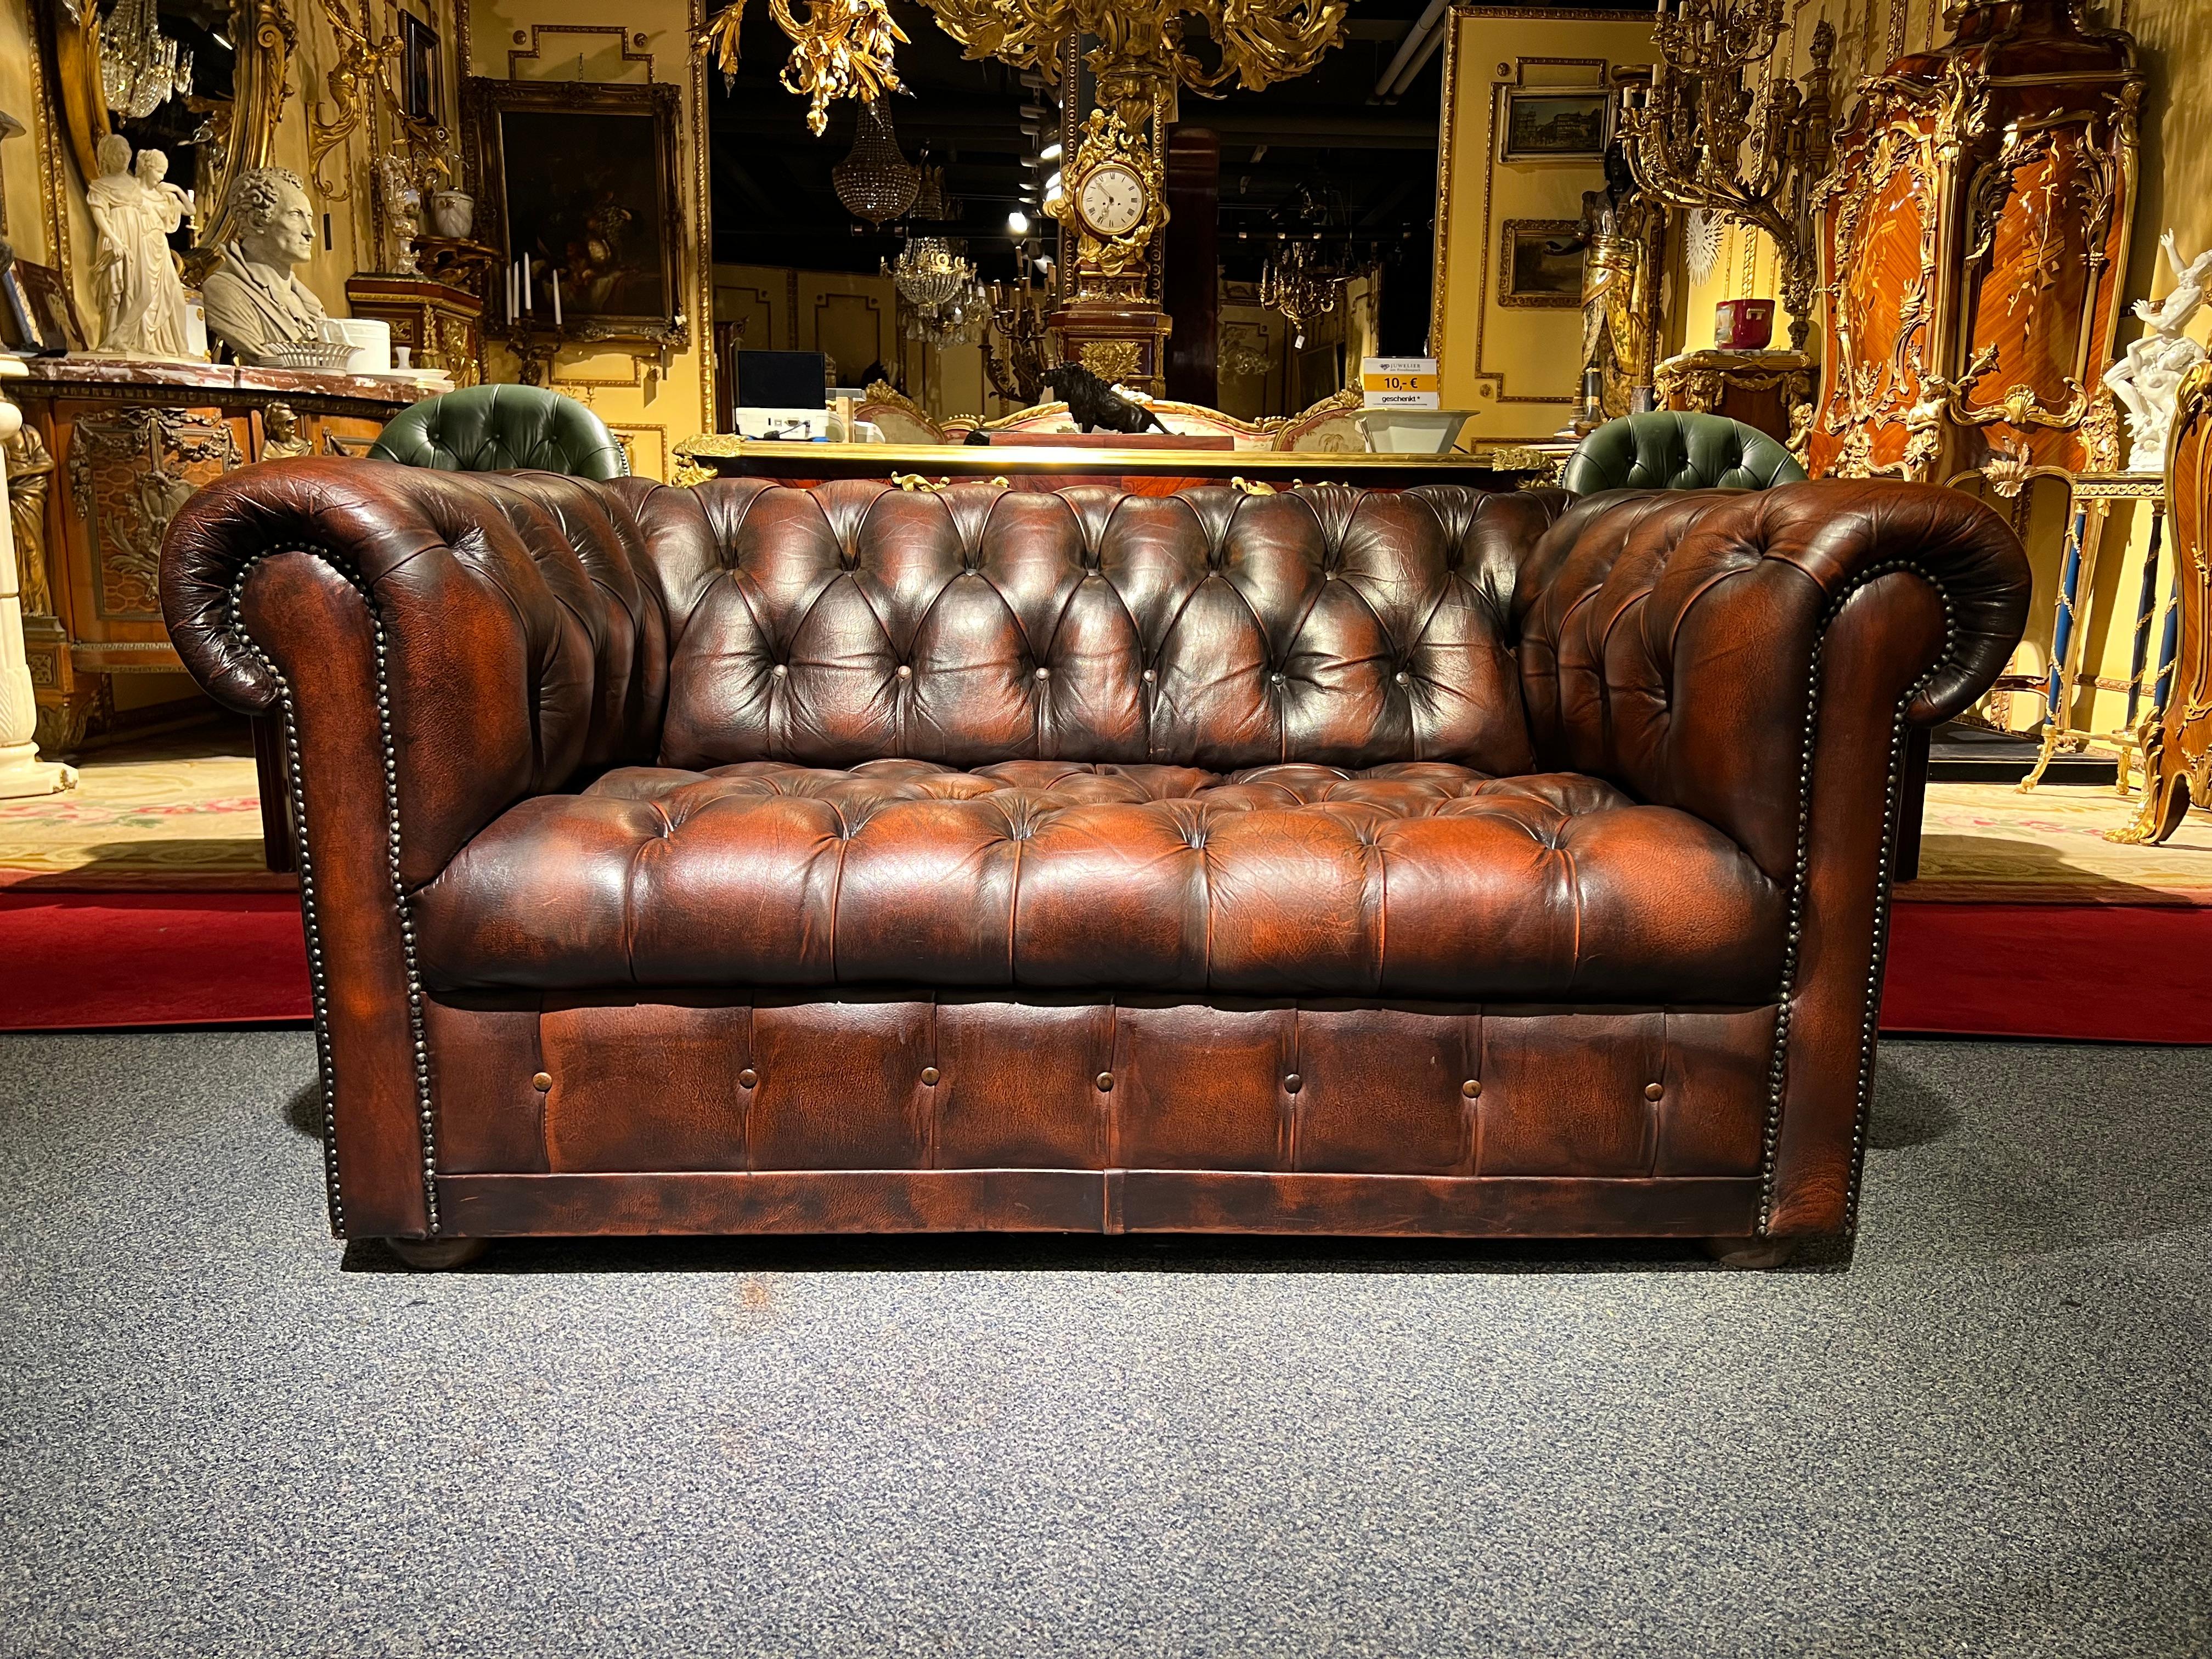 2-seat chesterfield sofa with button tufted detail. Exceptional quality. Double hand-stitching, and applied brass nailhead trim details. The ebonized composite orb feet have been left original, showing wear from age / use. The leather is aged